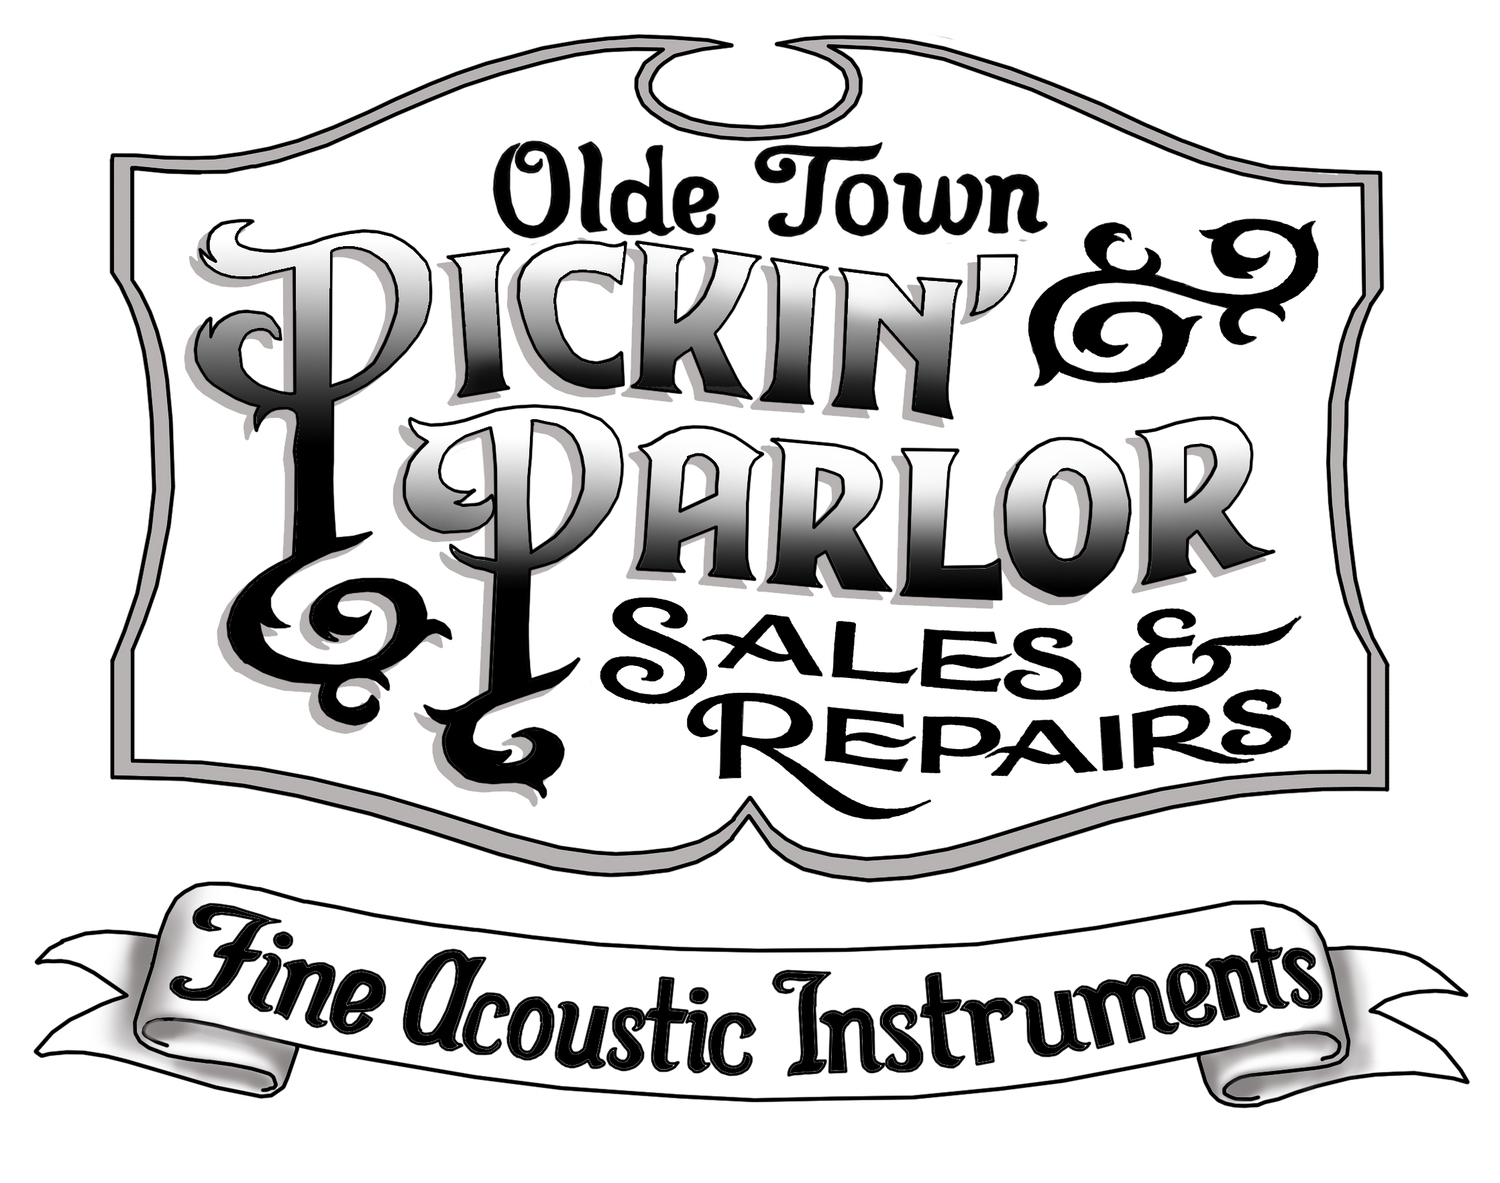 Olde Town Pickin' Parlor